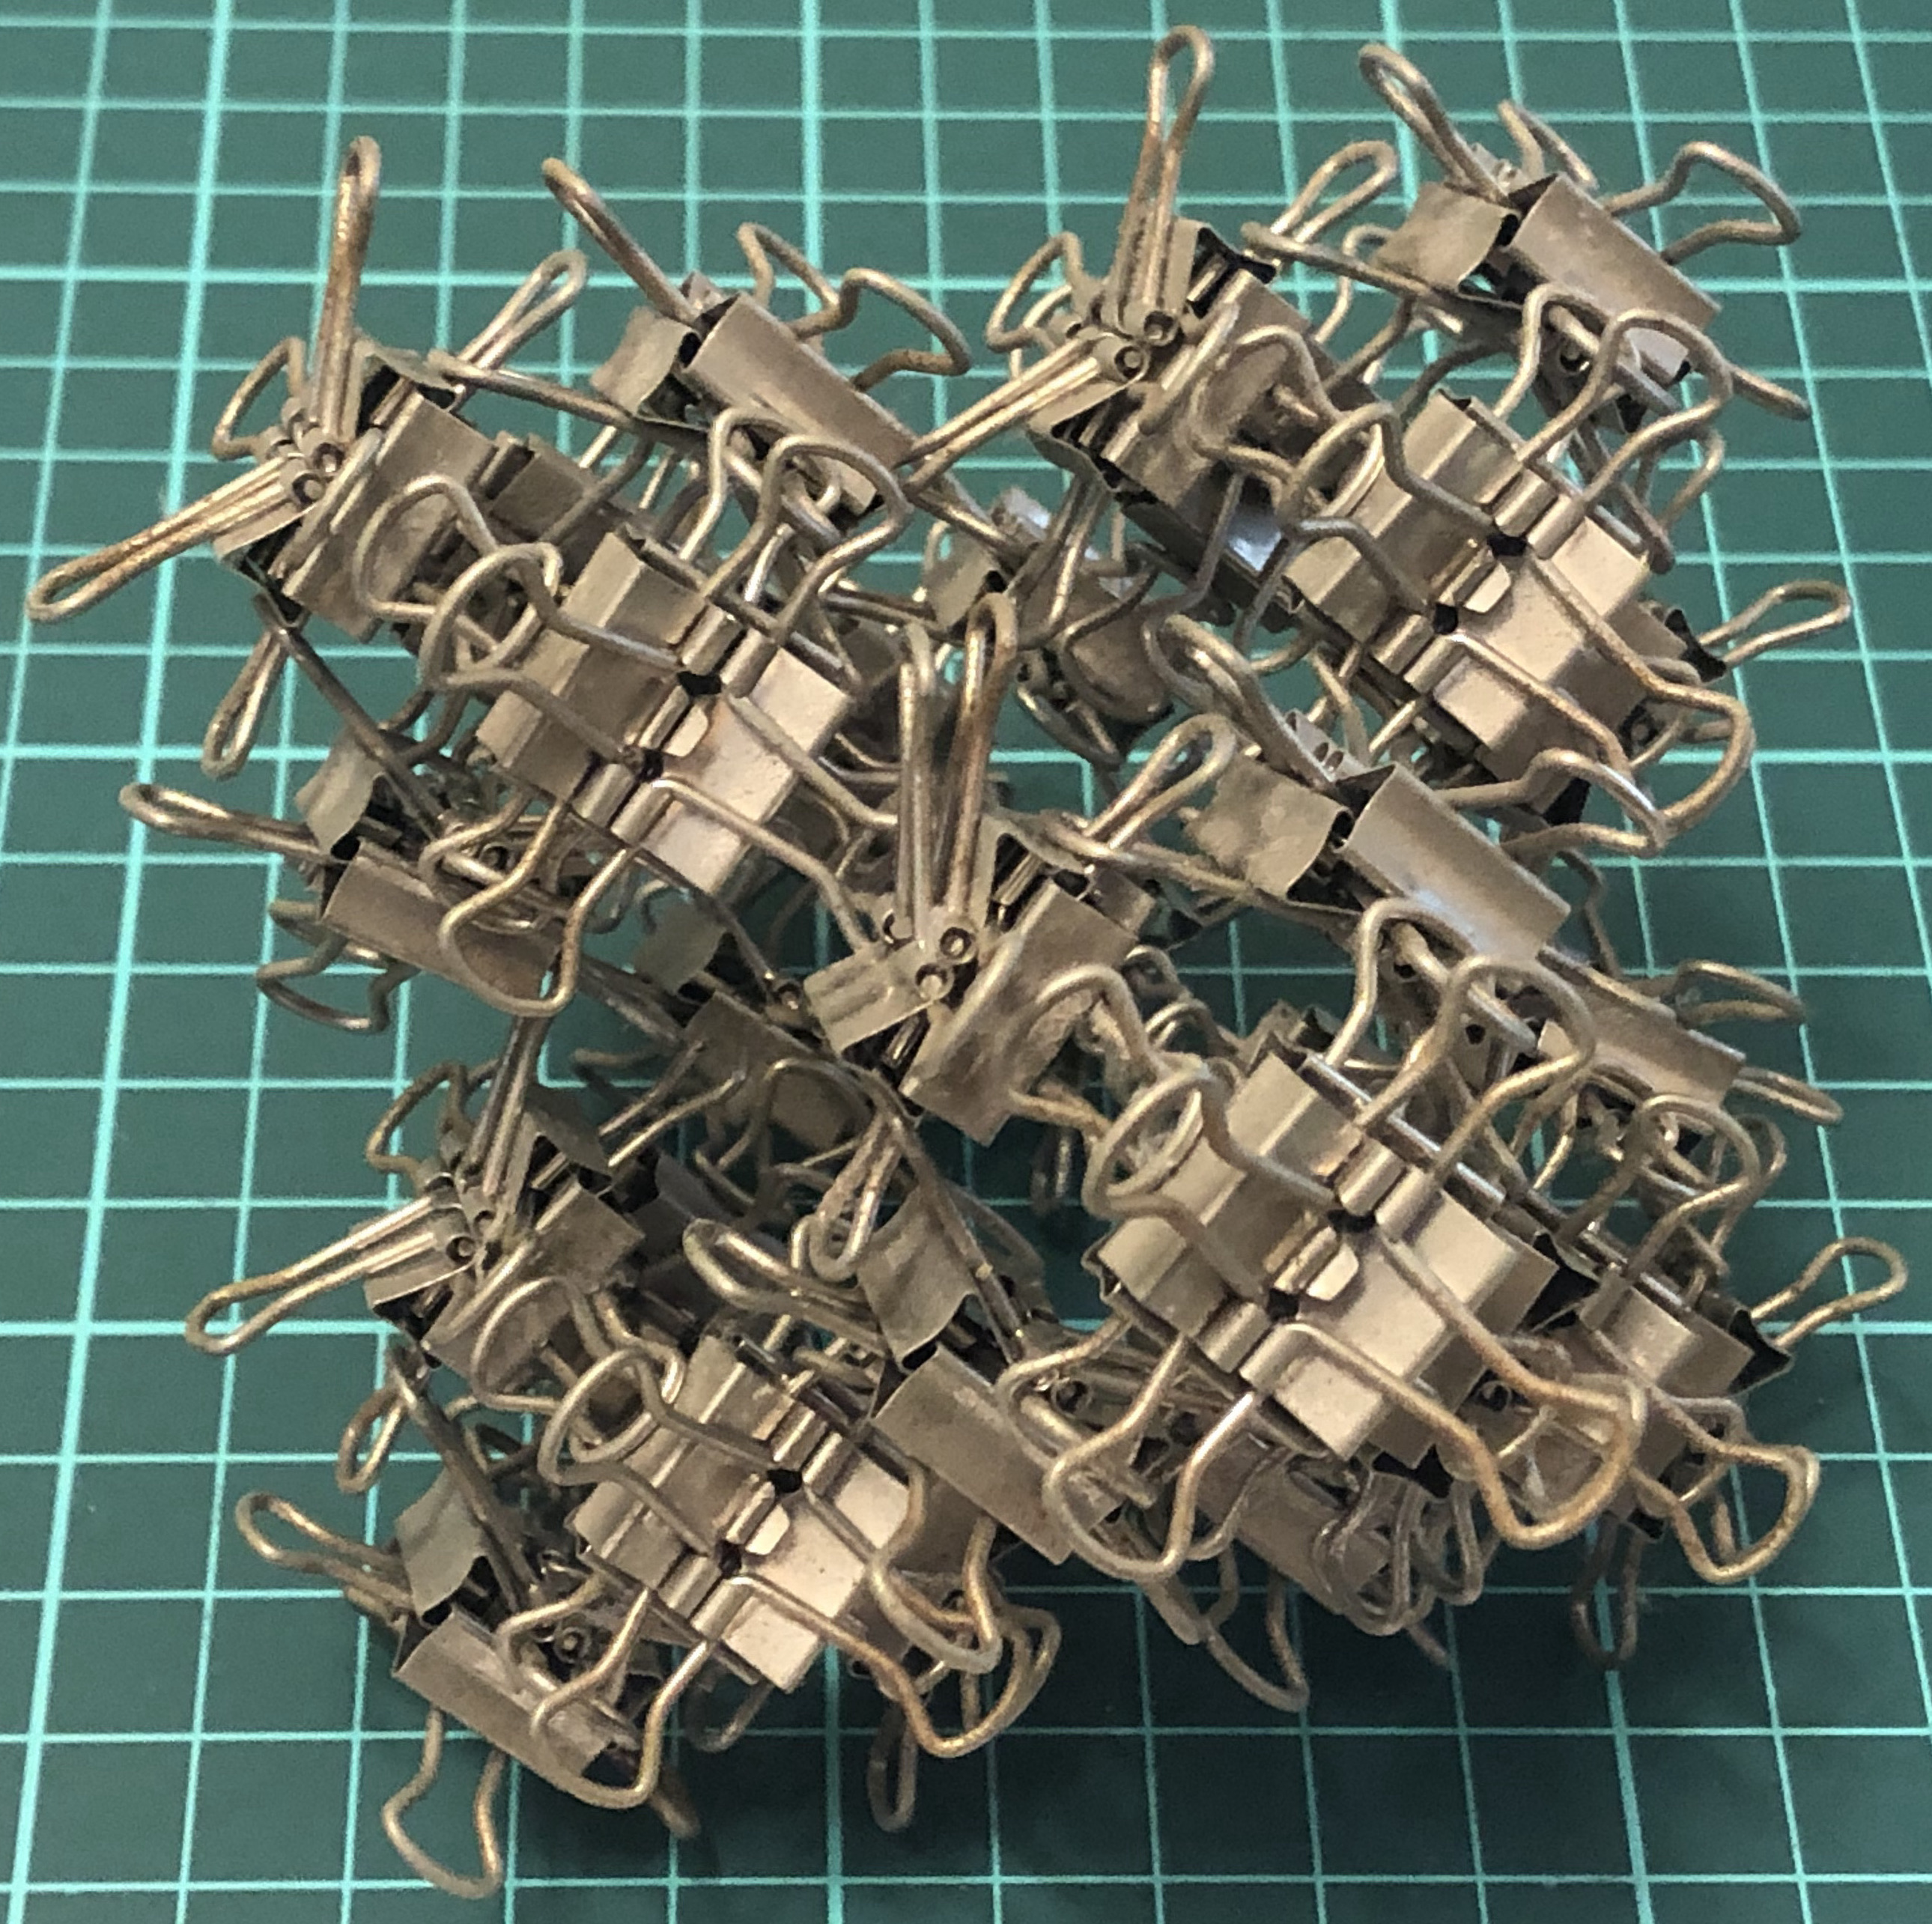 24 clips forming 30 Η-faces forming lofted cube